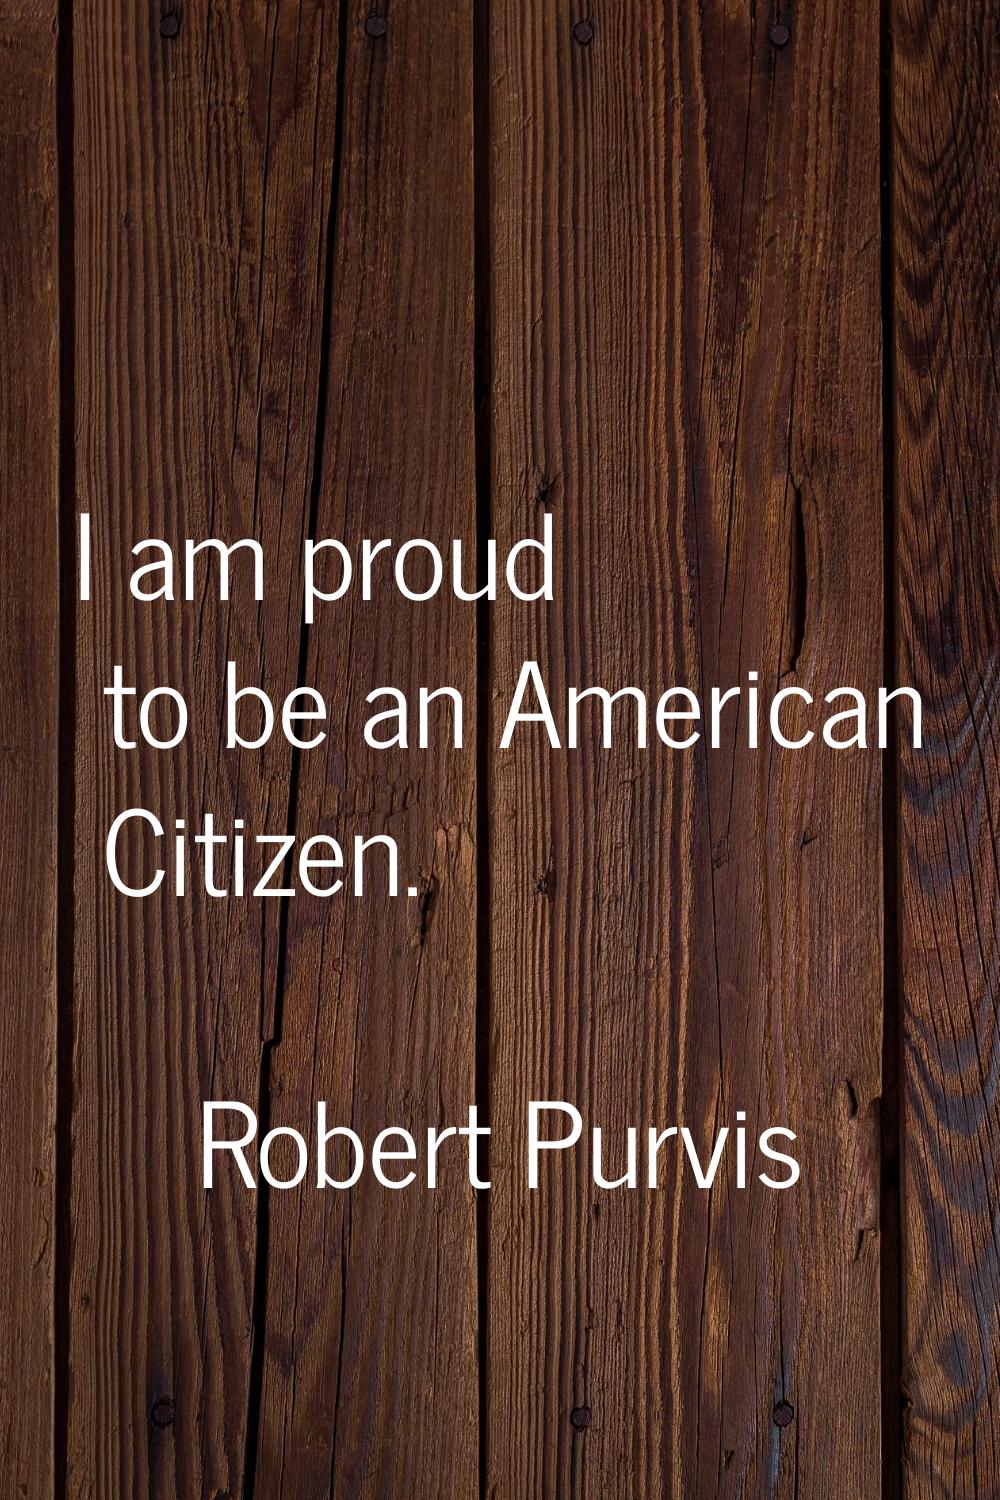 I am proud to be an American Citizen.